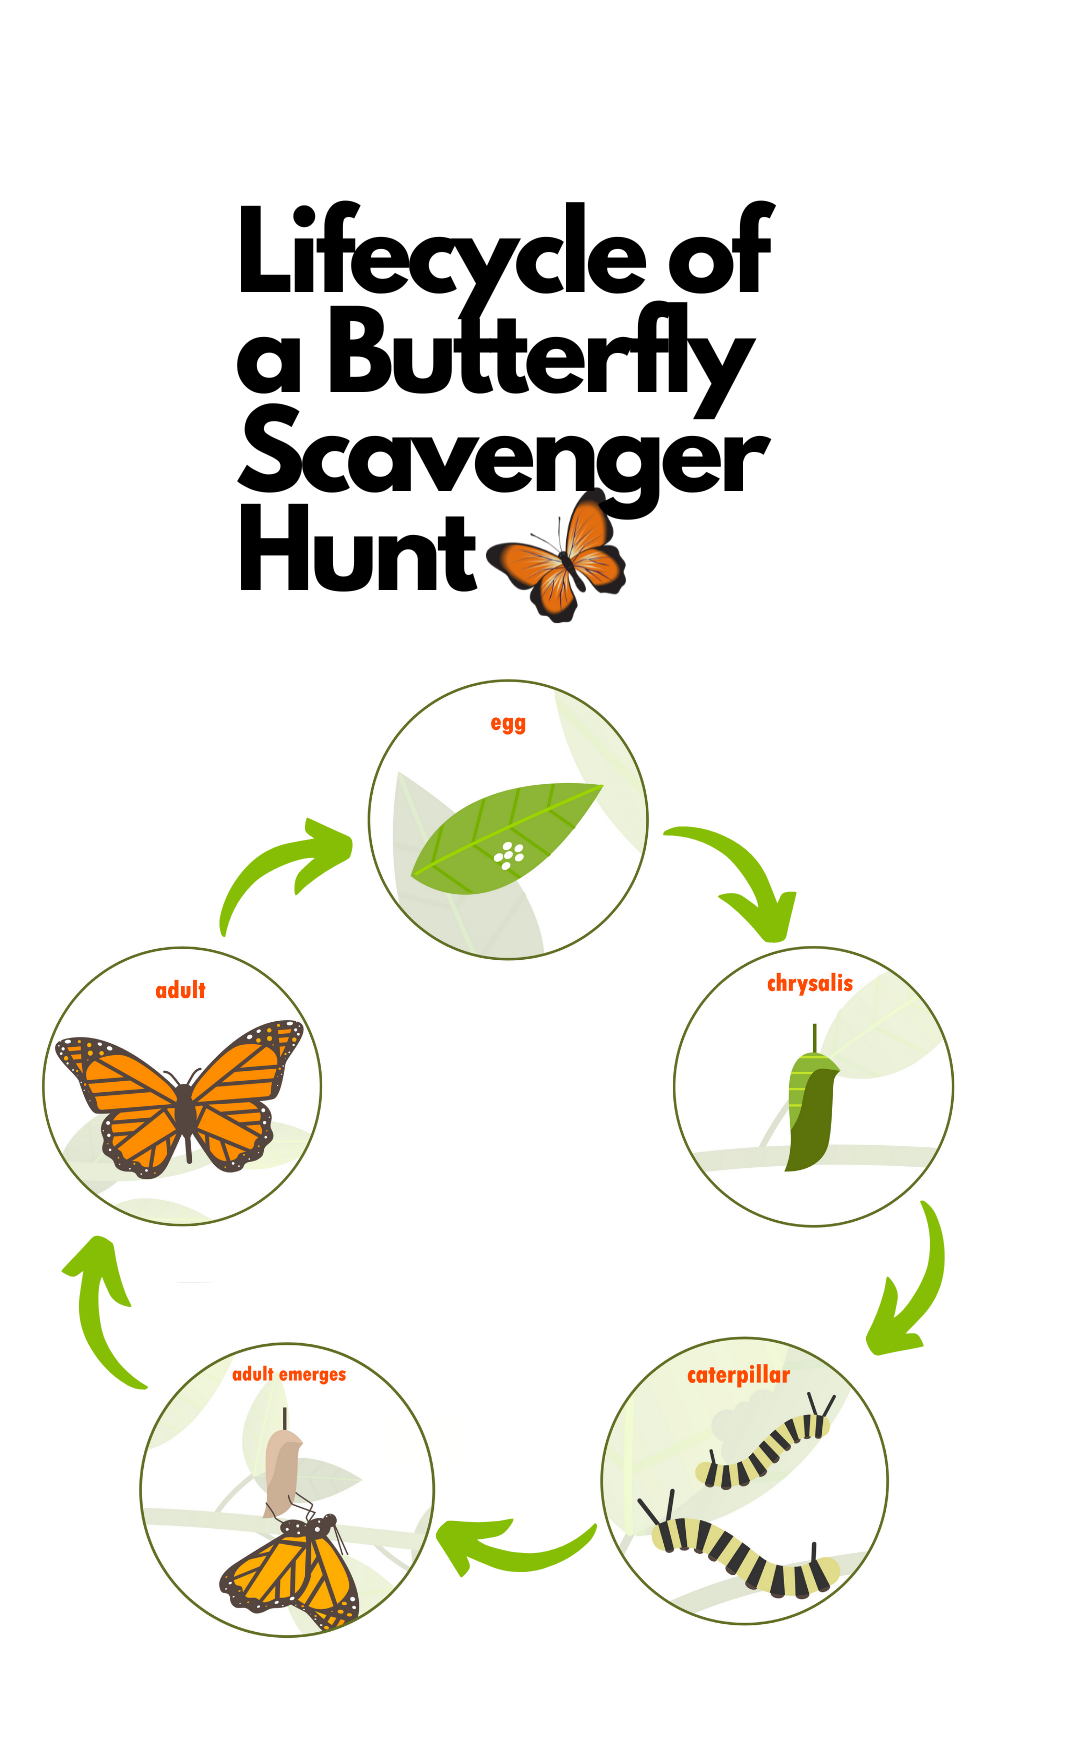 Lifecycle of a Butterfly Scavenger Hunt